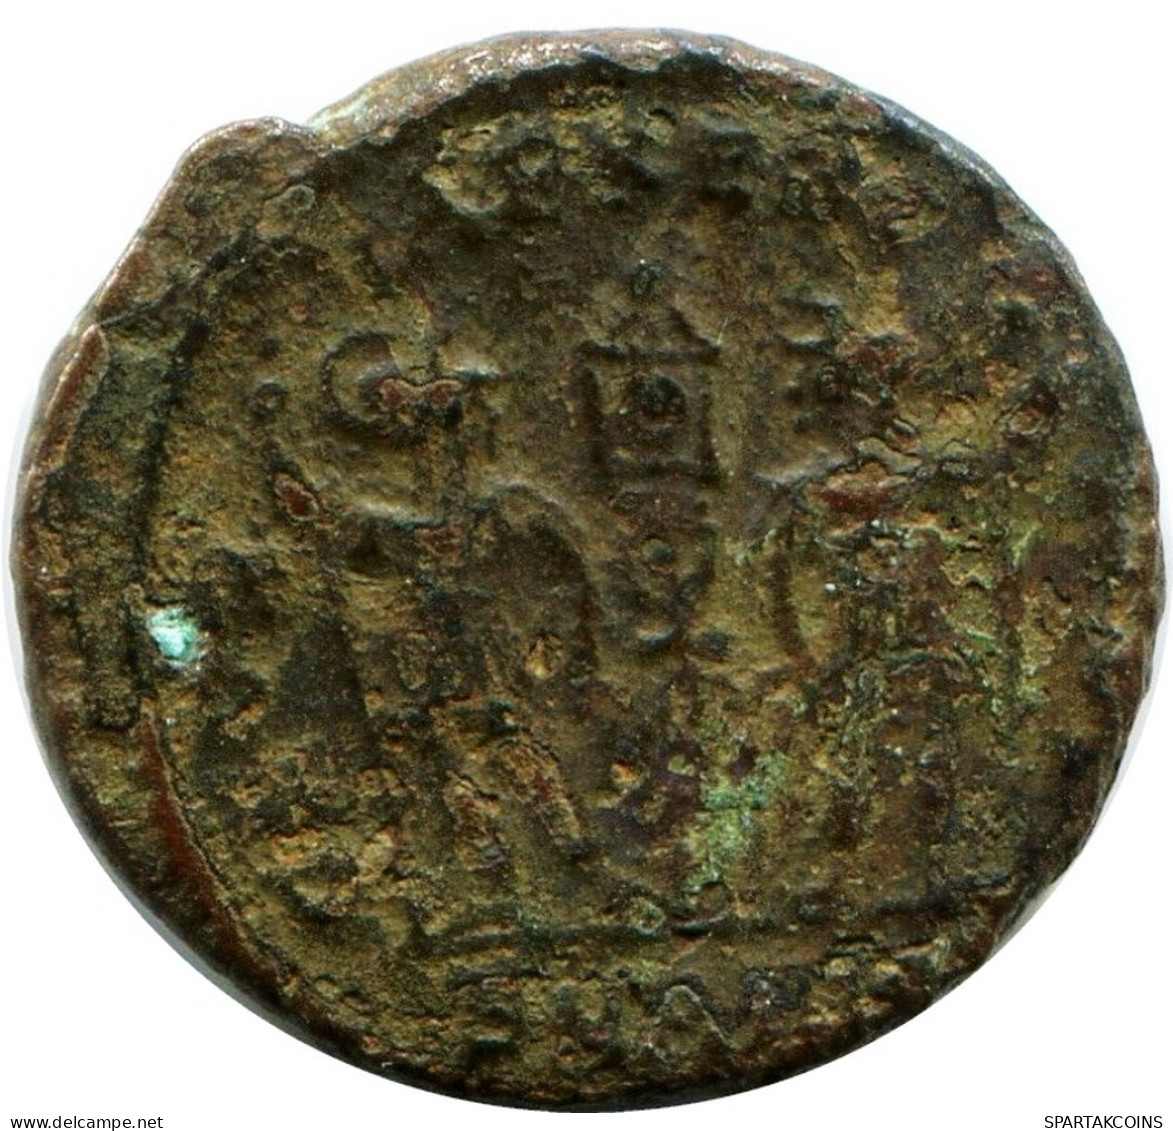 CONSTANS MINTED IN ANTIOCH FOUND IN IHNASYAH HOARD EGYPT #ANC11833.14.U.A - El Impero Christiano (307 / 363)